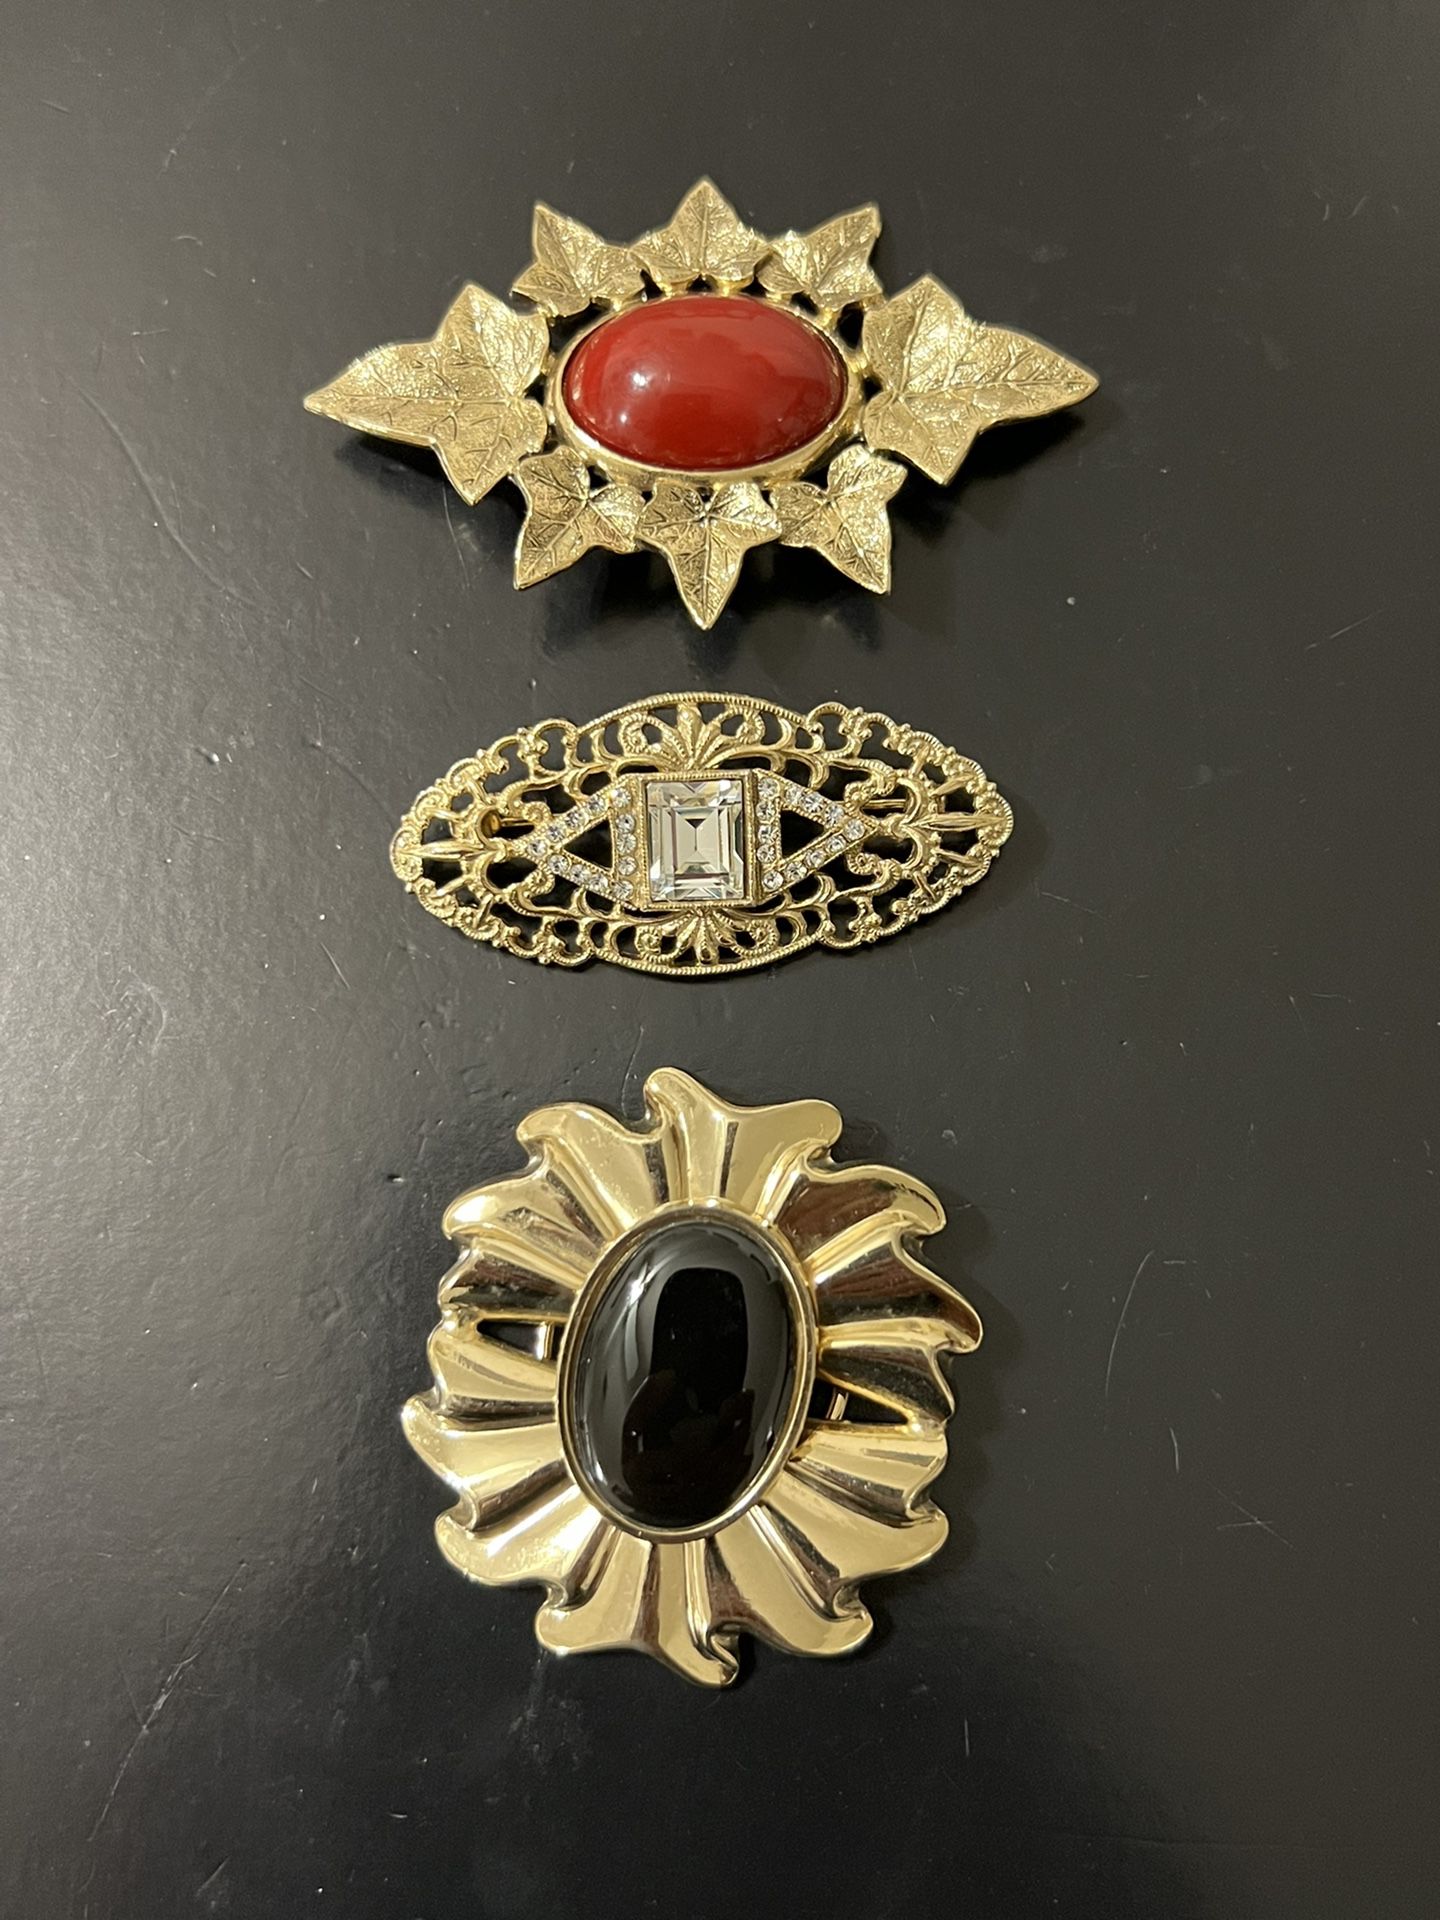 THREE  BEAUTIFUL VINTAGE CUSTOM JEWELRY FOR SALE EACH ONE FOR $35 